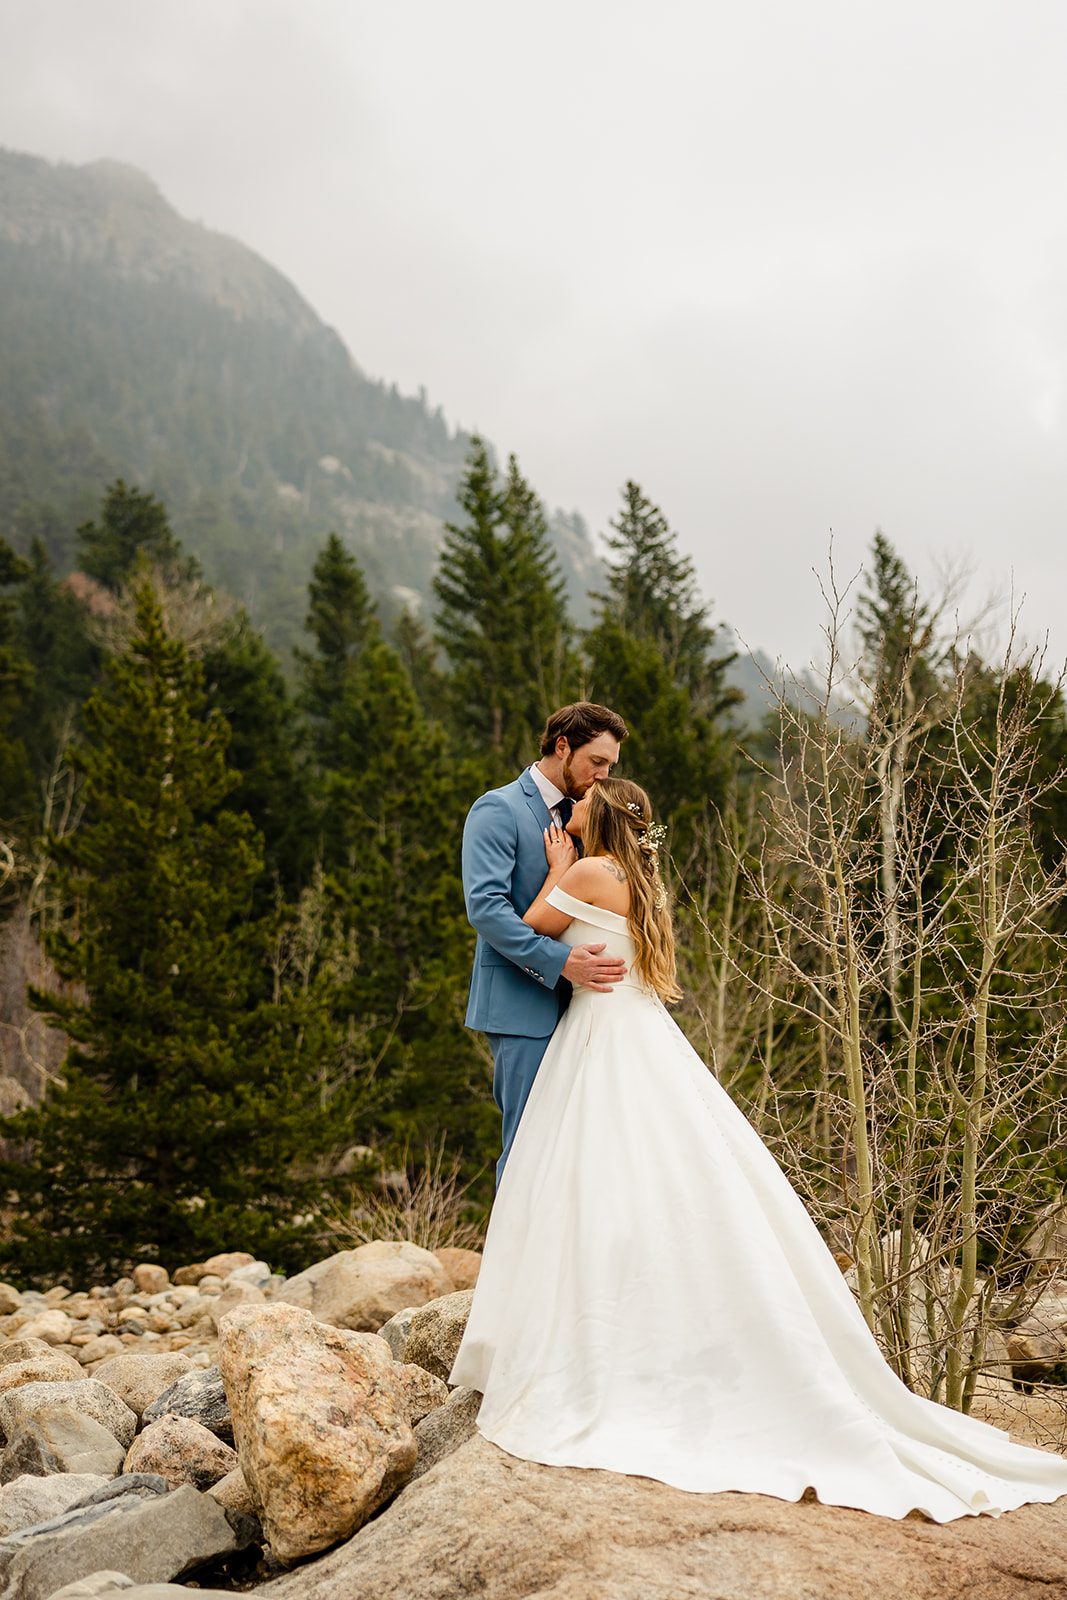 Bride and Groom Colorado Elopement photos at at Alluvial Fan Bridge in Rocky Mountain National Park